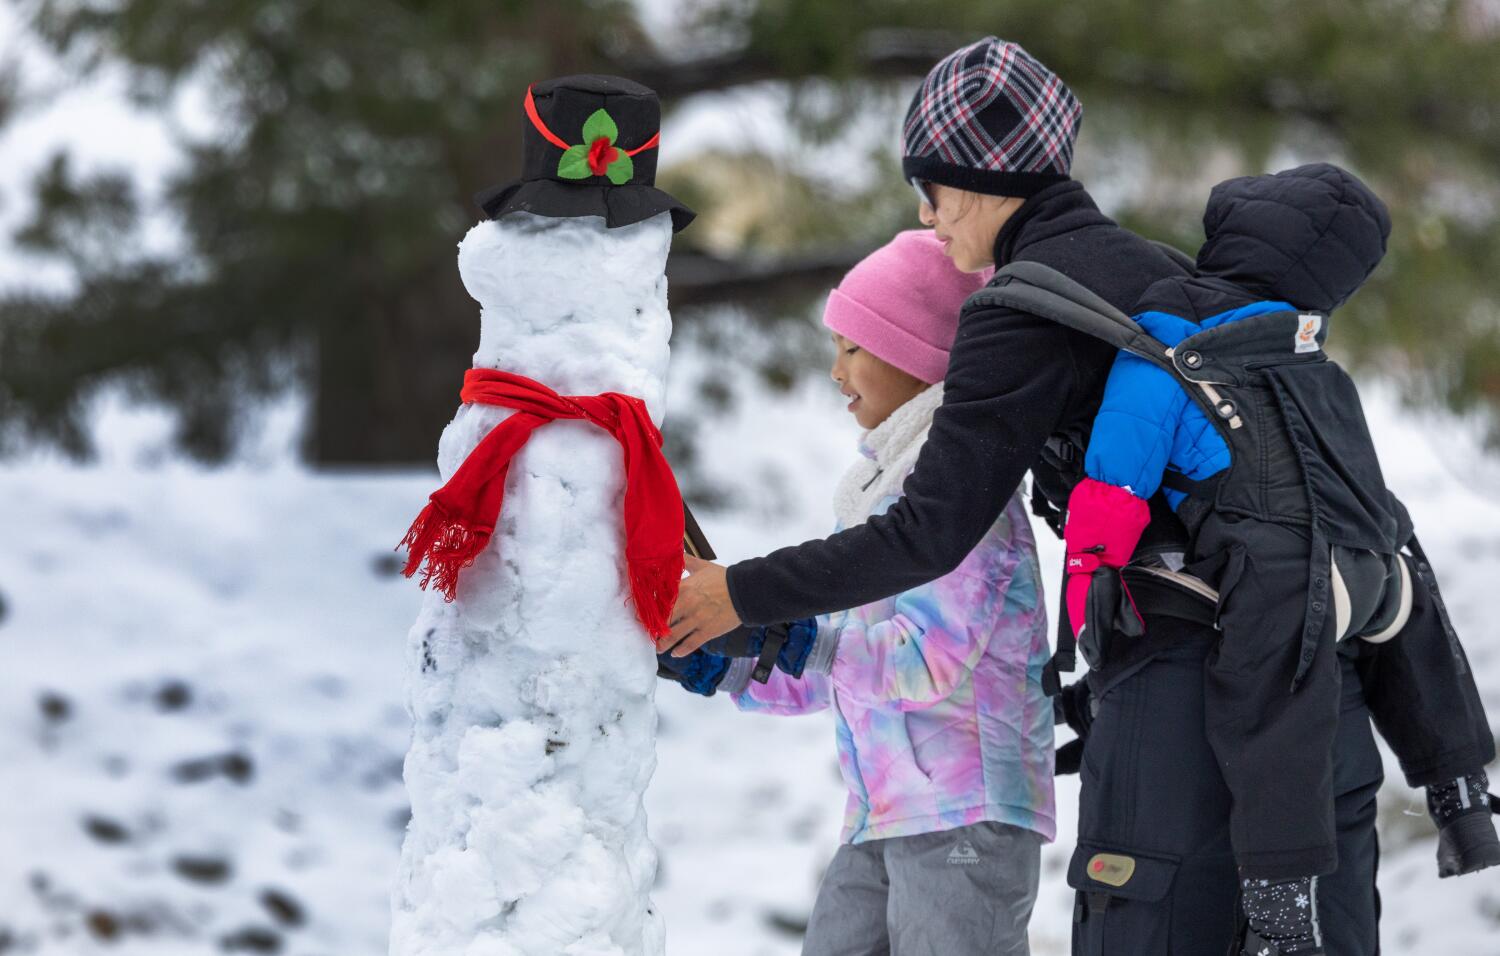 California's biggest winter storm so far is on its way after a slow start for Sierra snow